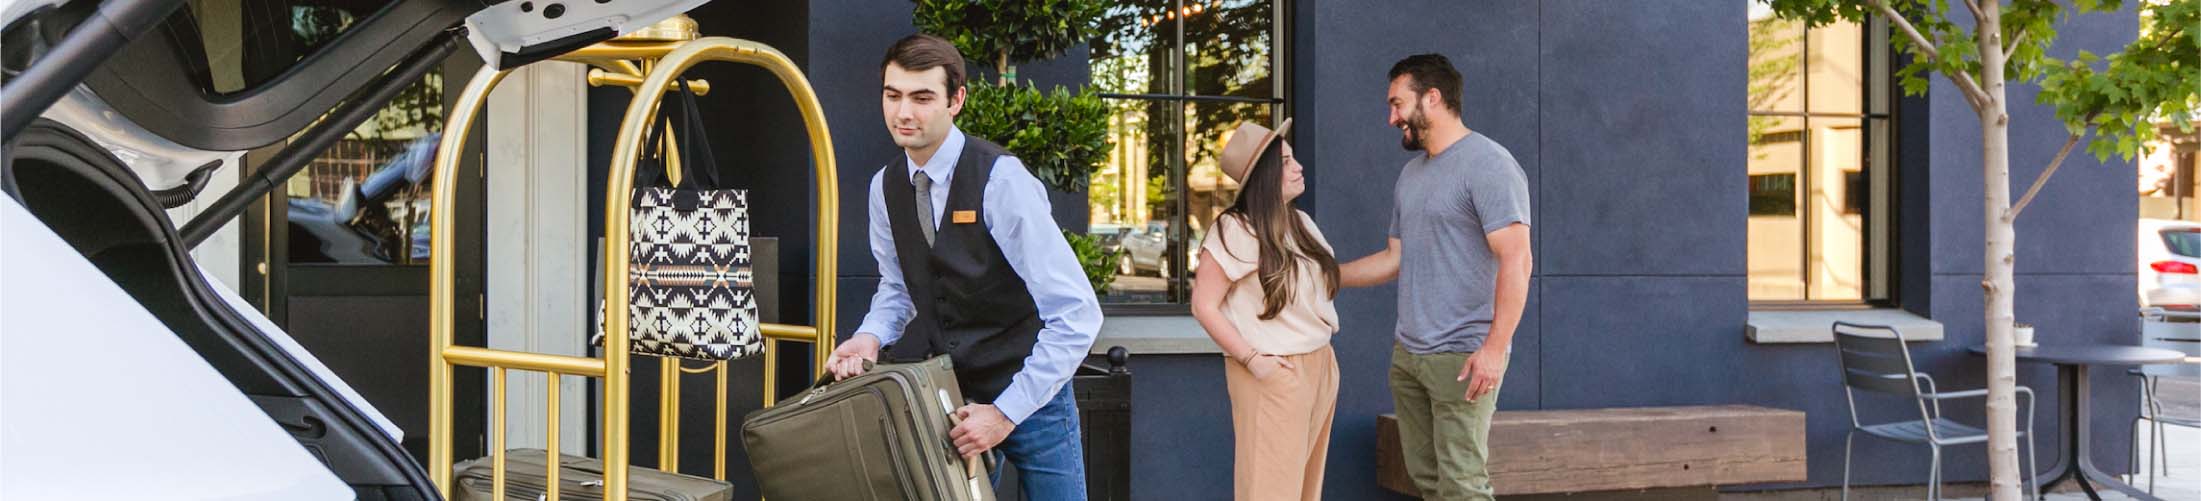 An Atticus Hotel valet loads luggage onto a cart for a couple standing behind him.